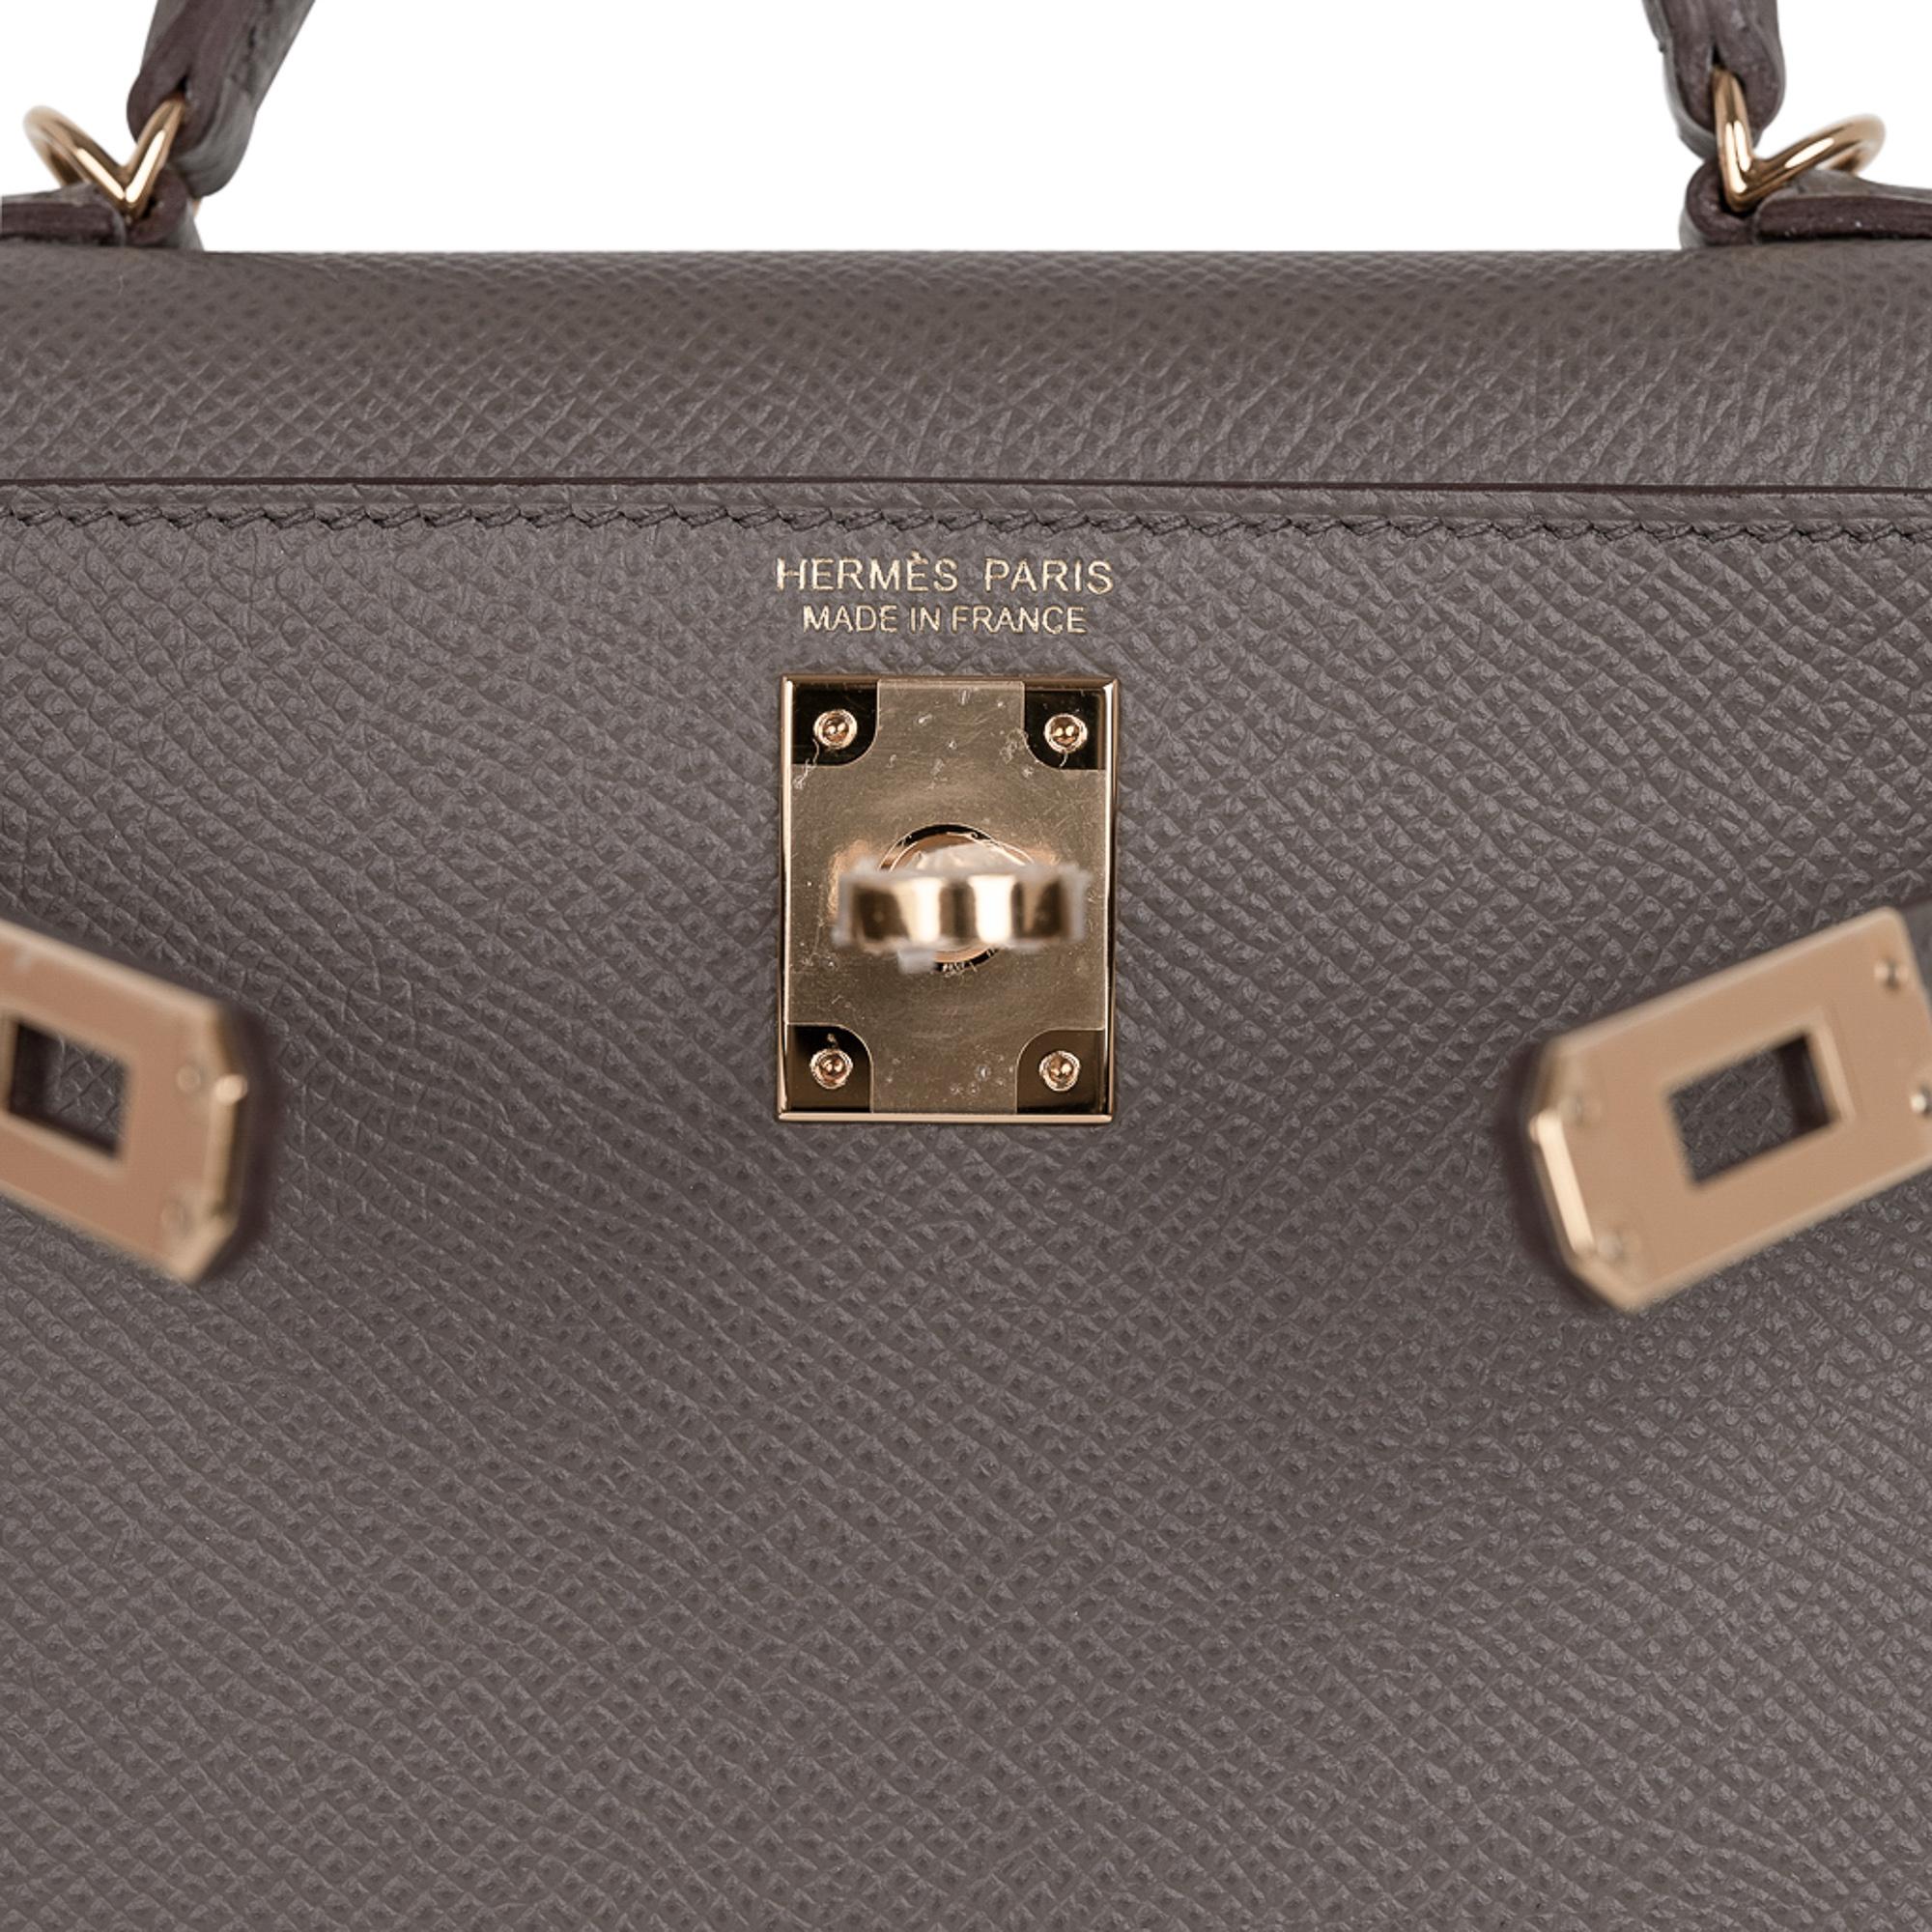 Hermes Kelly 20 Mini Sellier bag featured in neutral Etain. 
Epsom leather and accentuated with gold hardware.
Comes with signature Hermes box, shoulder strap, and sleeper.
This bag is also available in Rose Lipstick, Rouge Tomate, Gold, Havane,